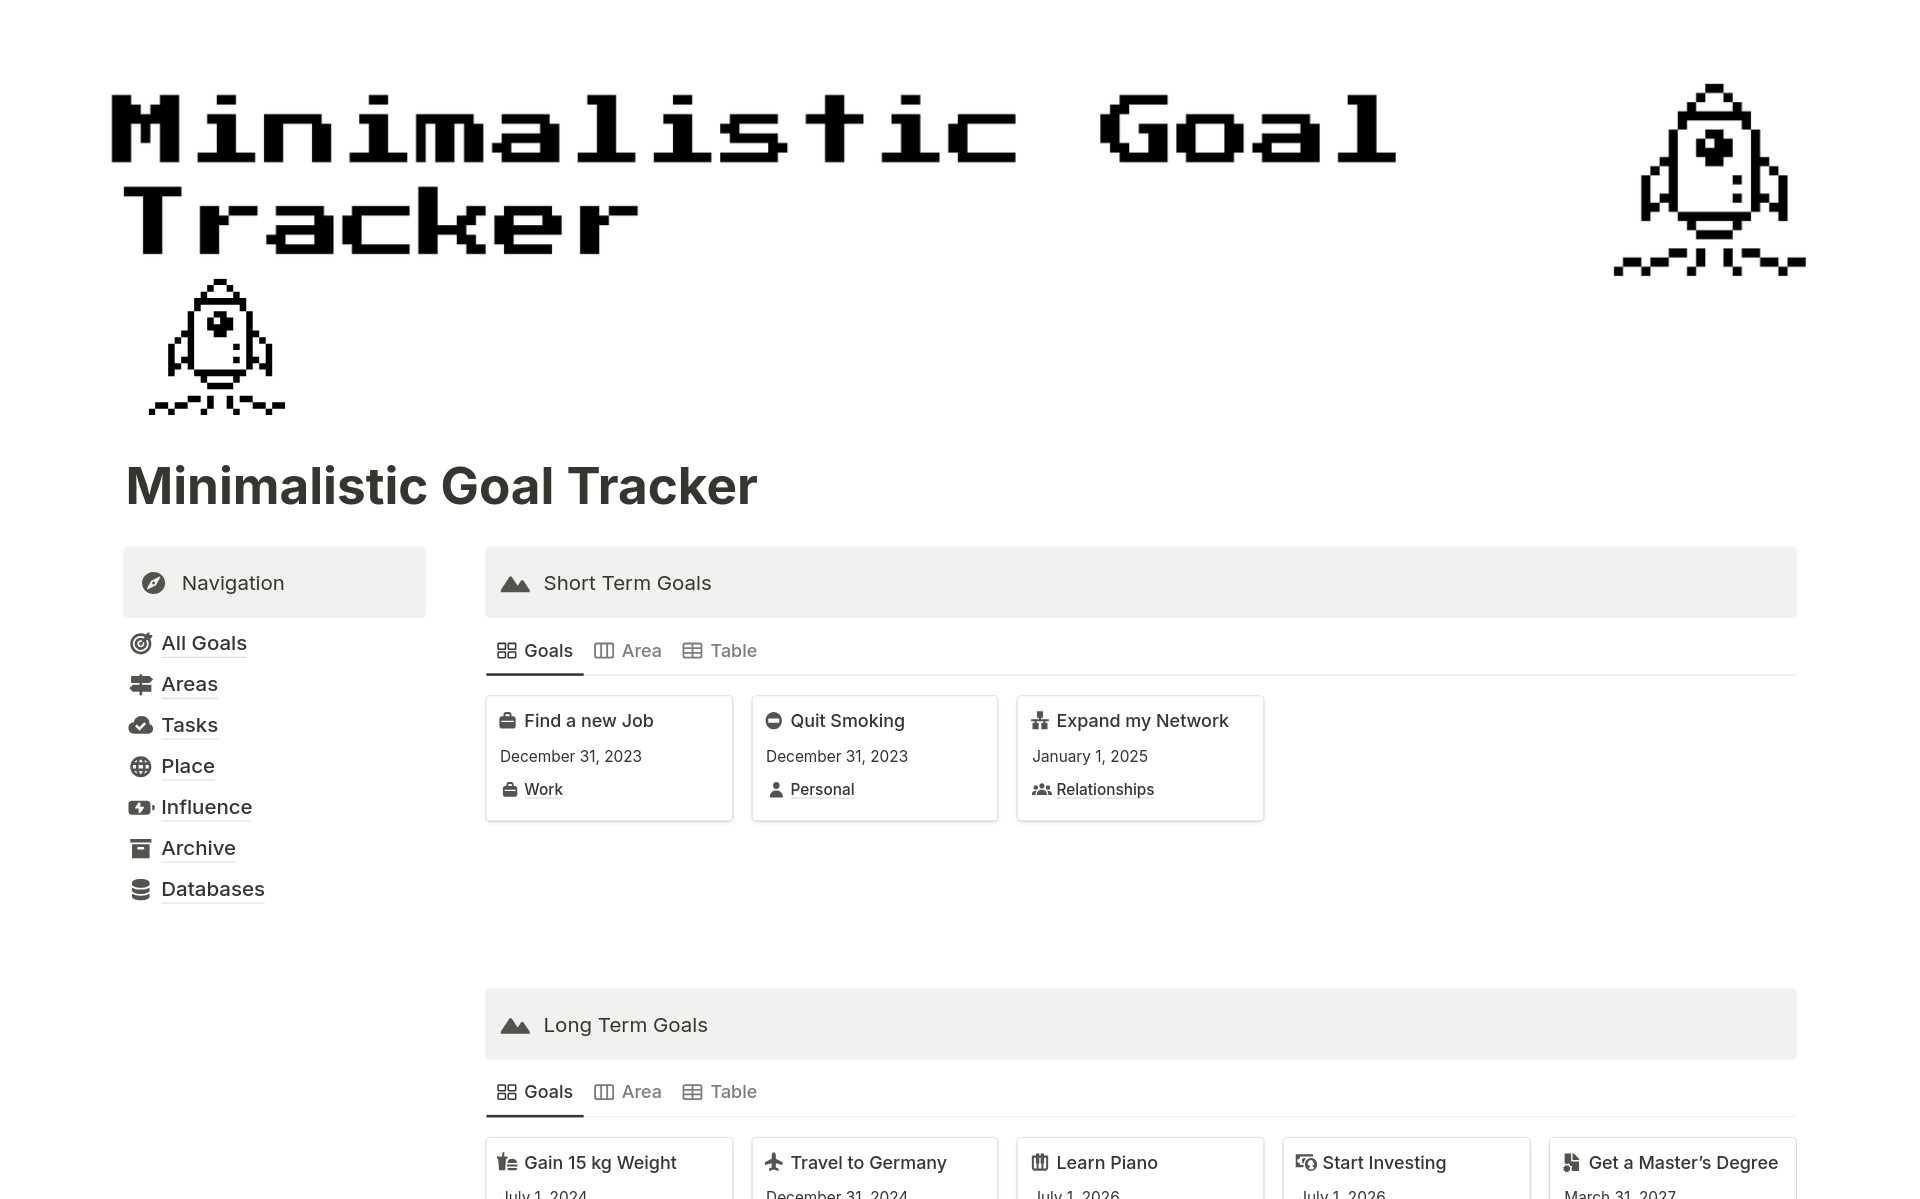 A template preview for Goal Tracker